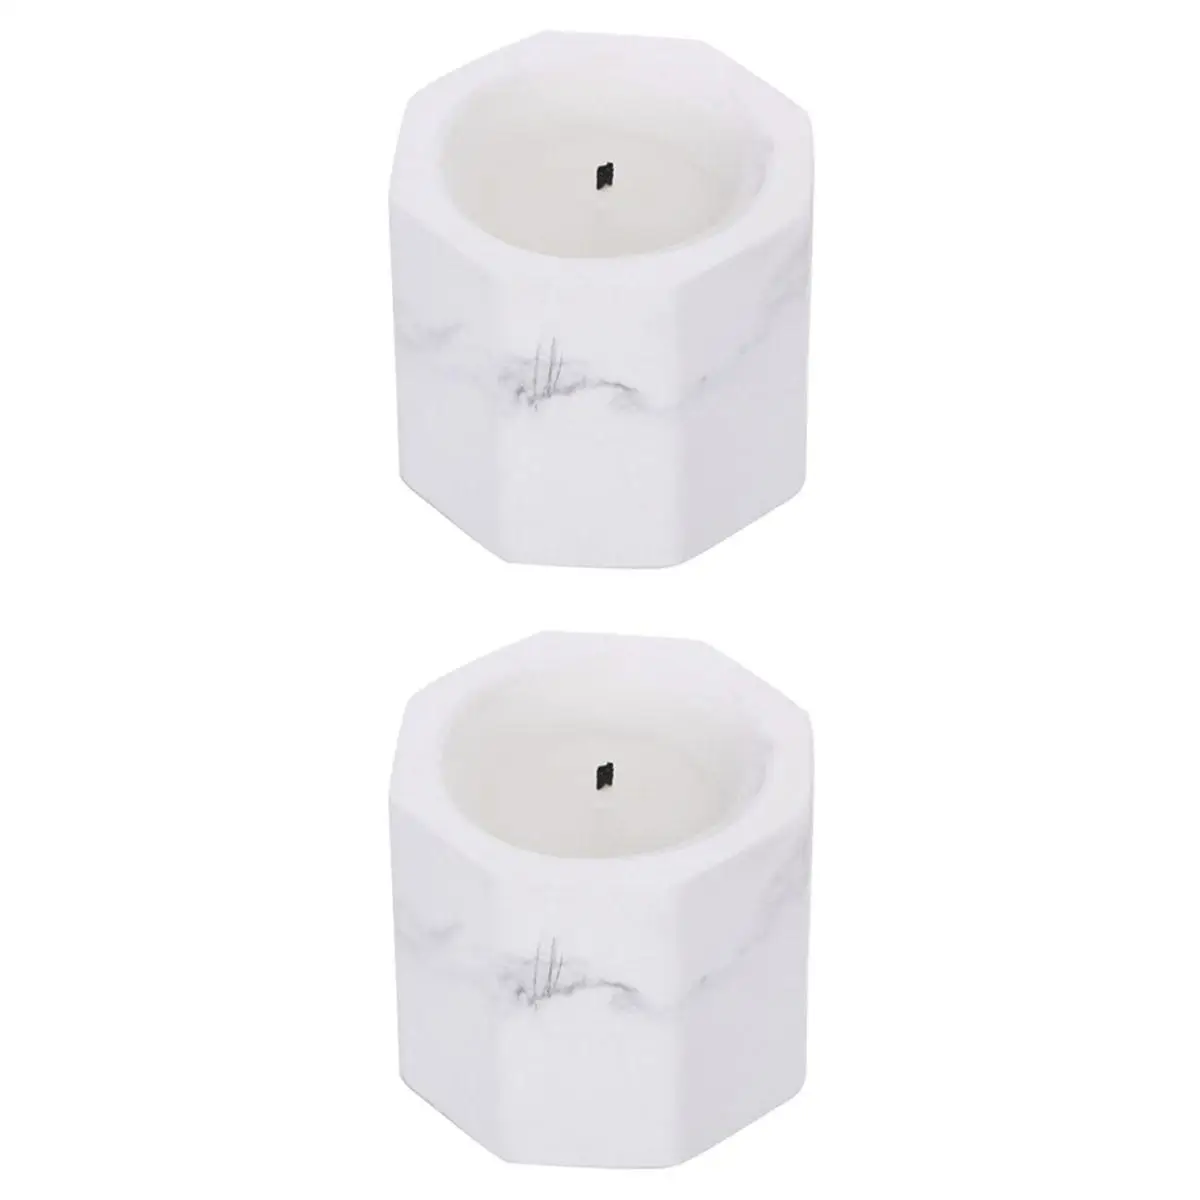 2pcs Scented Candle Soy Wax Aromatherapy Candles Bedroom Spa Decor